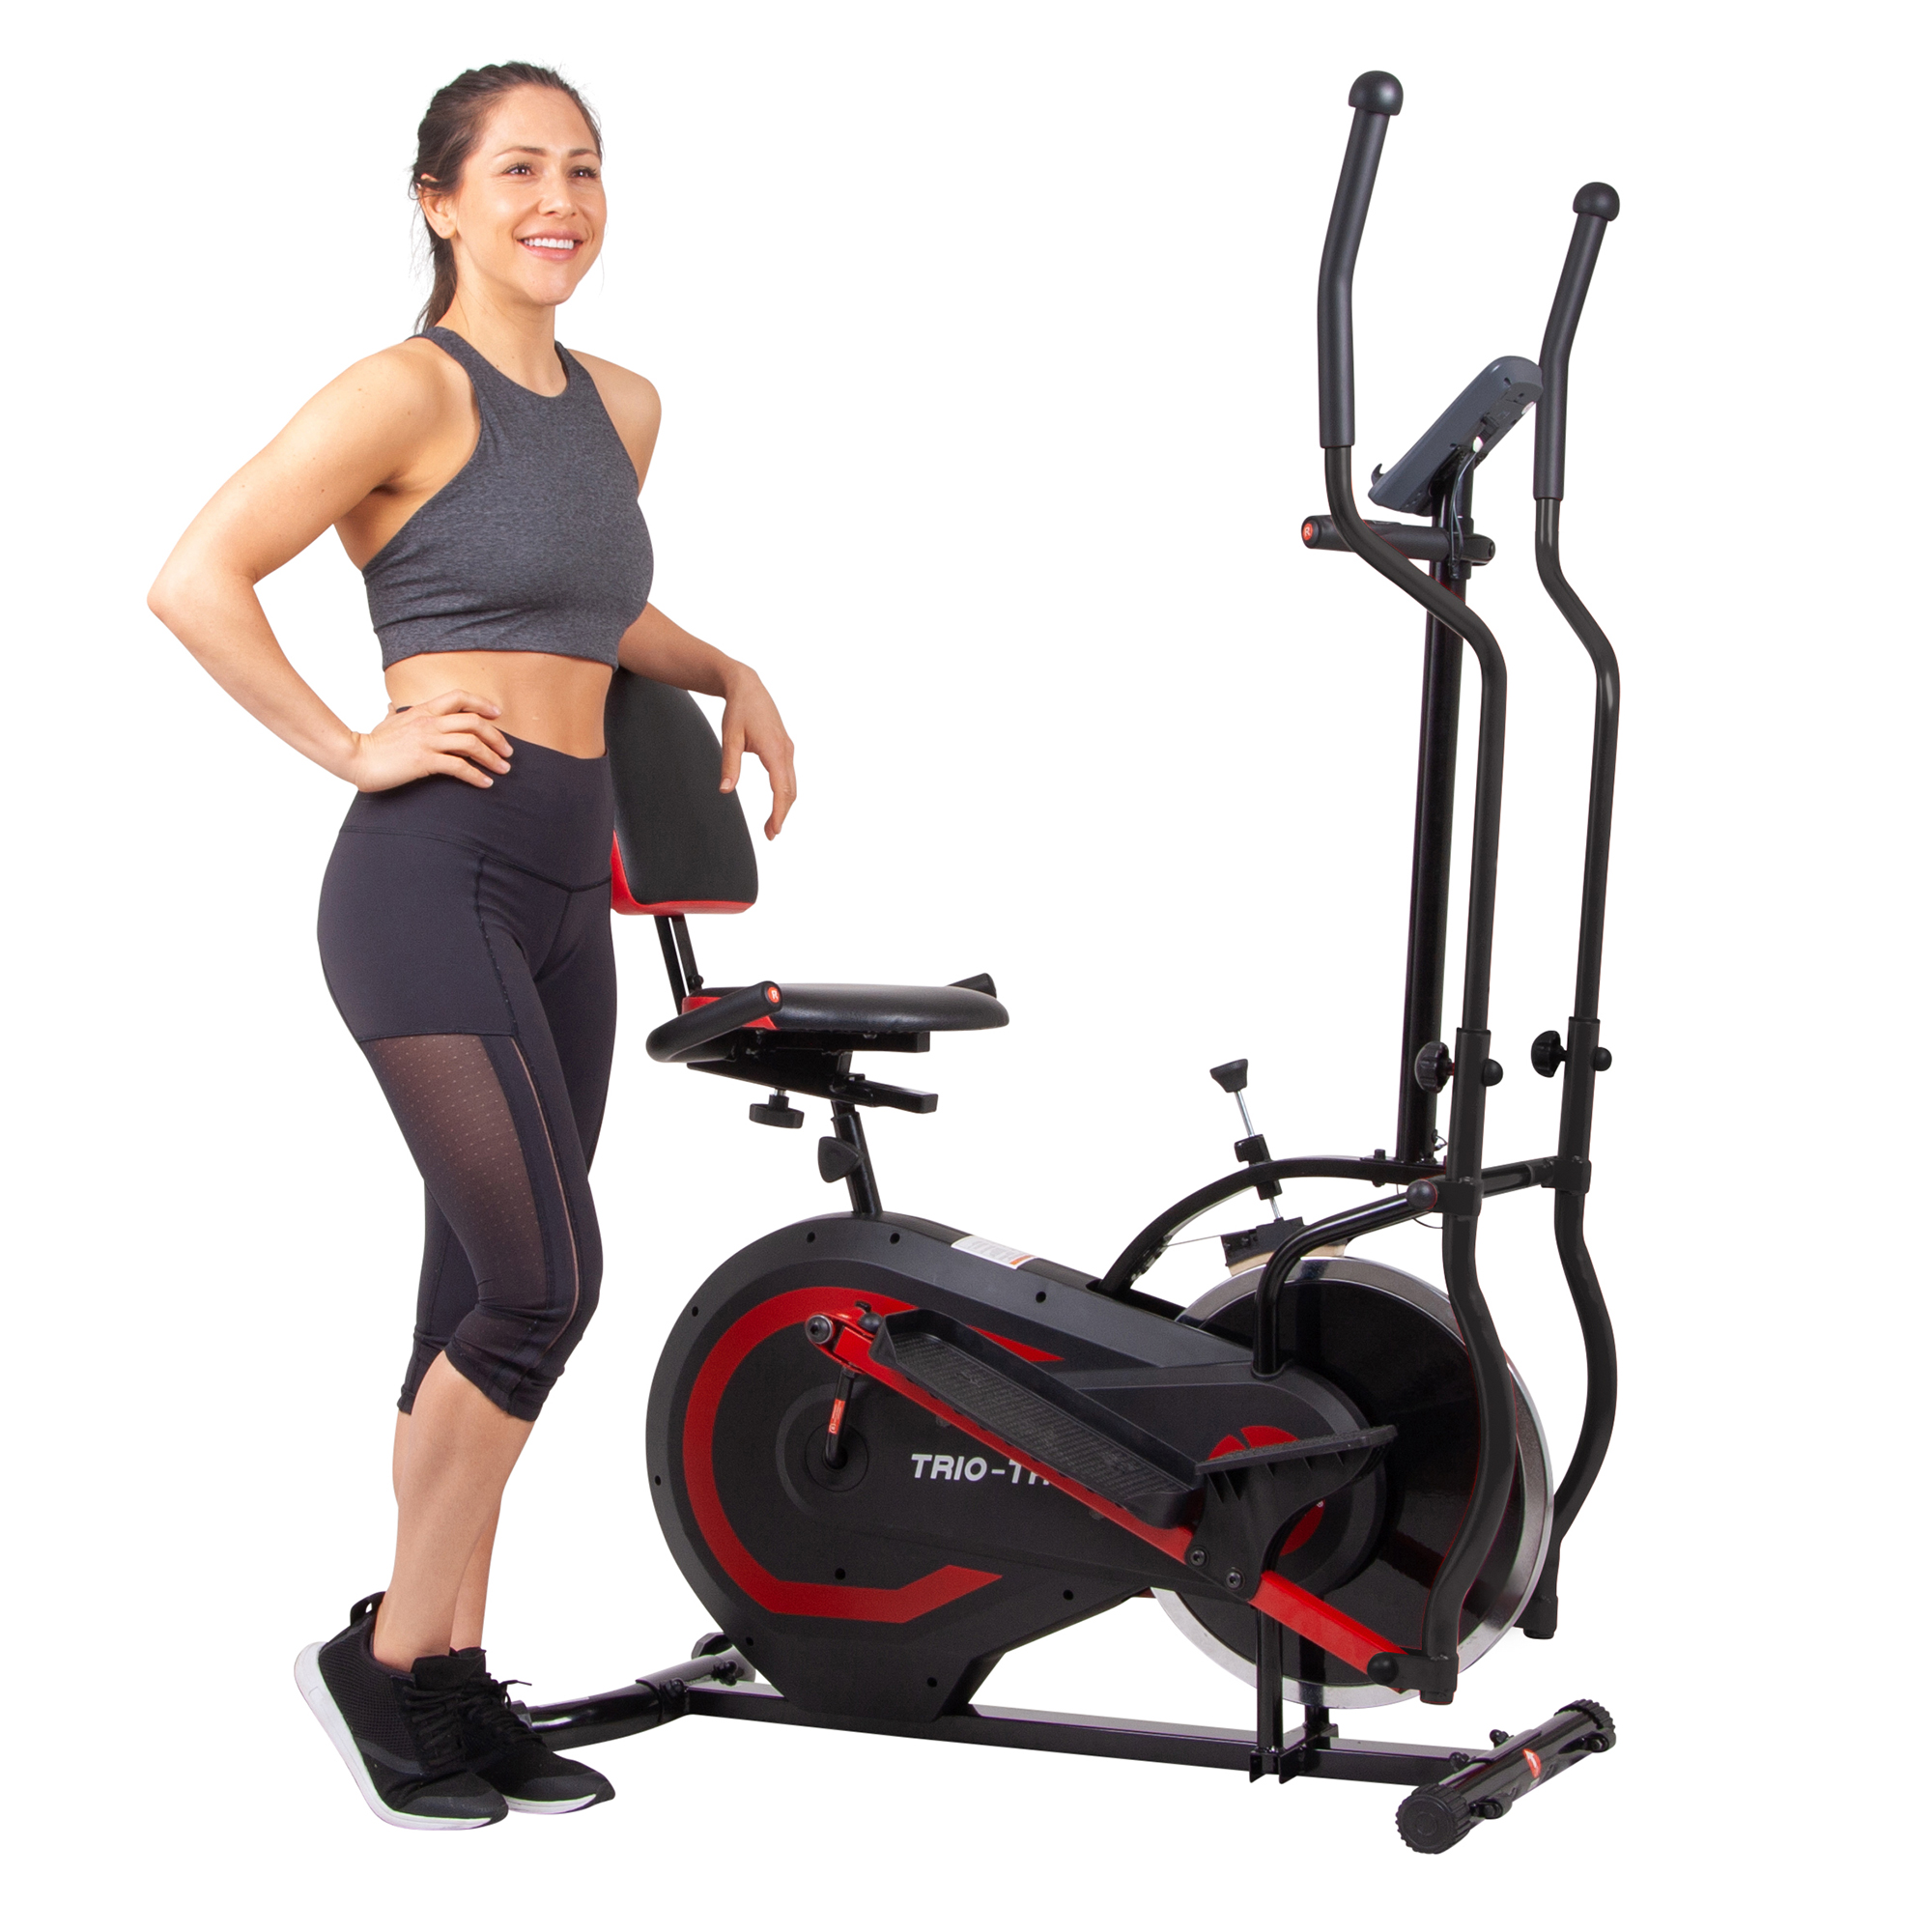 Body Flex Sports 3 in 1 Trio Trainer Home Gym Cardio Exercise Fitness Machine - image 4 of 8